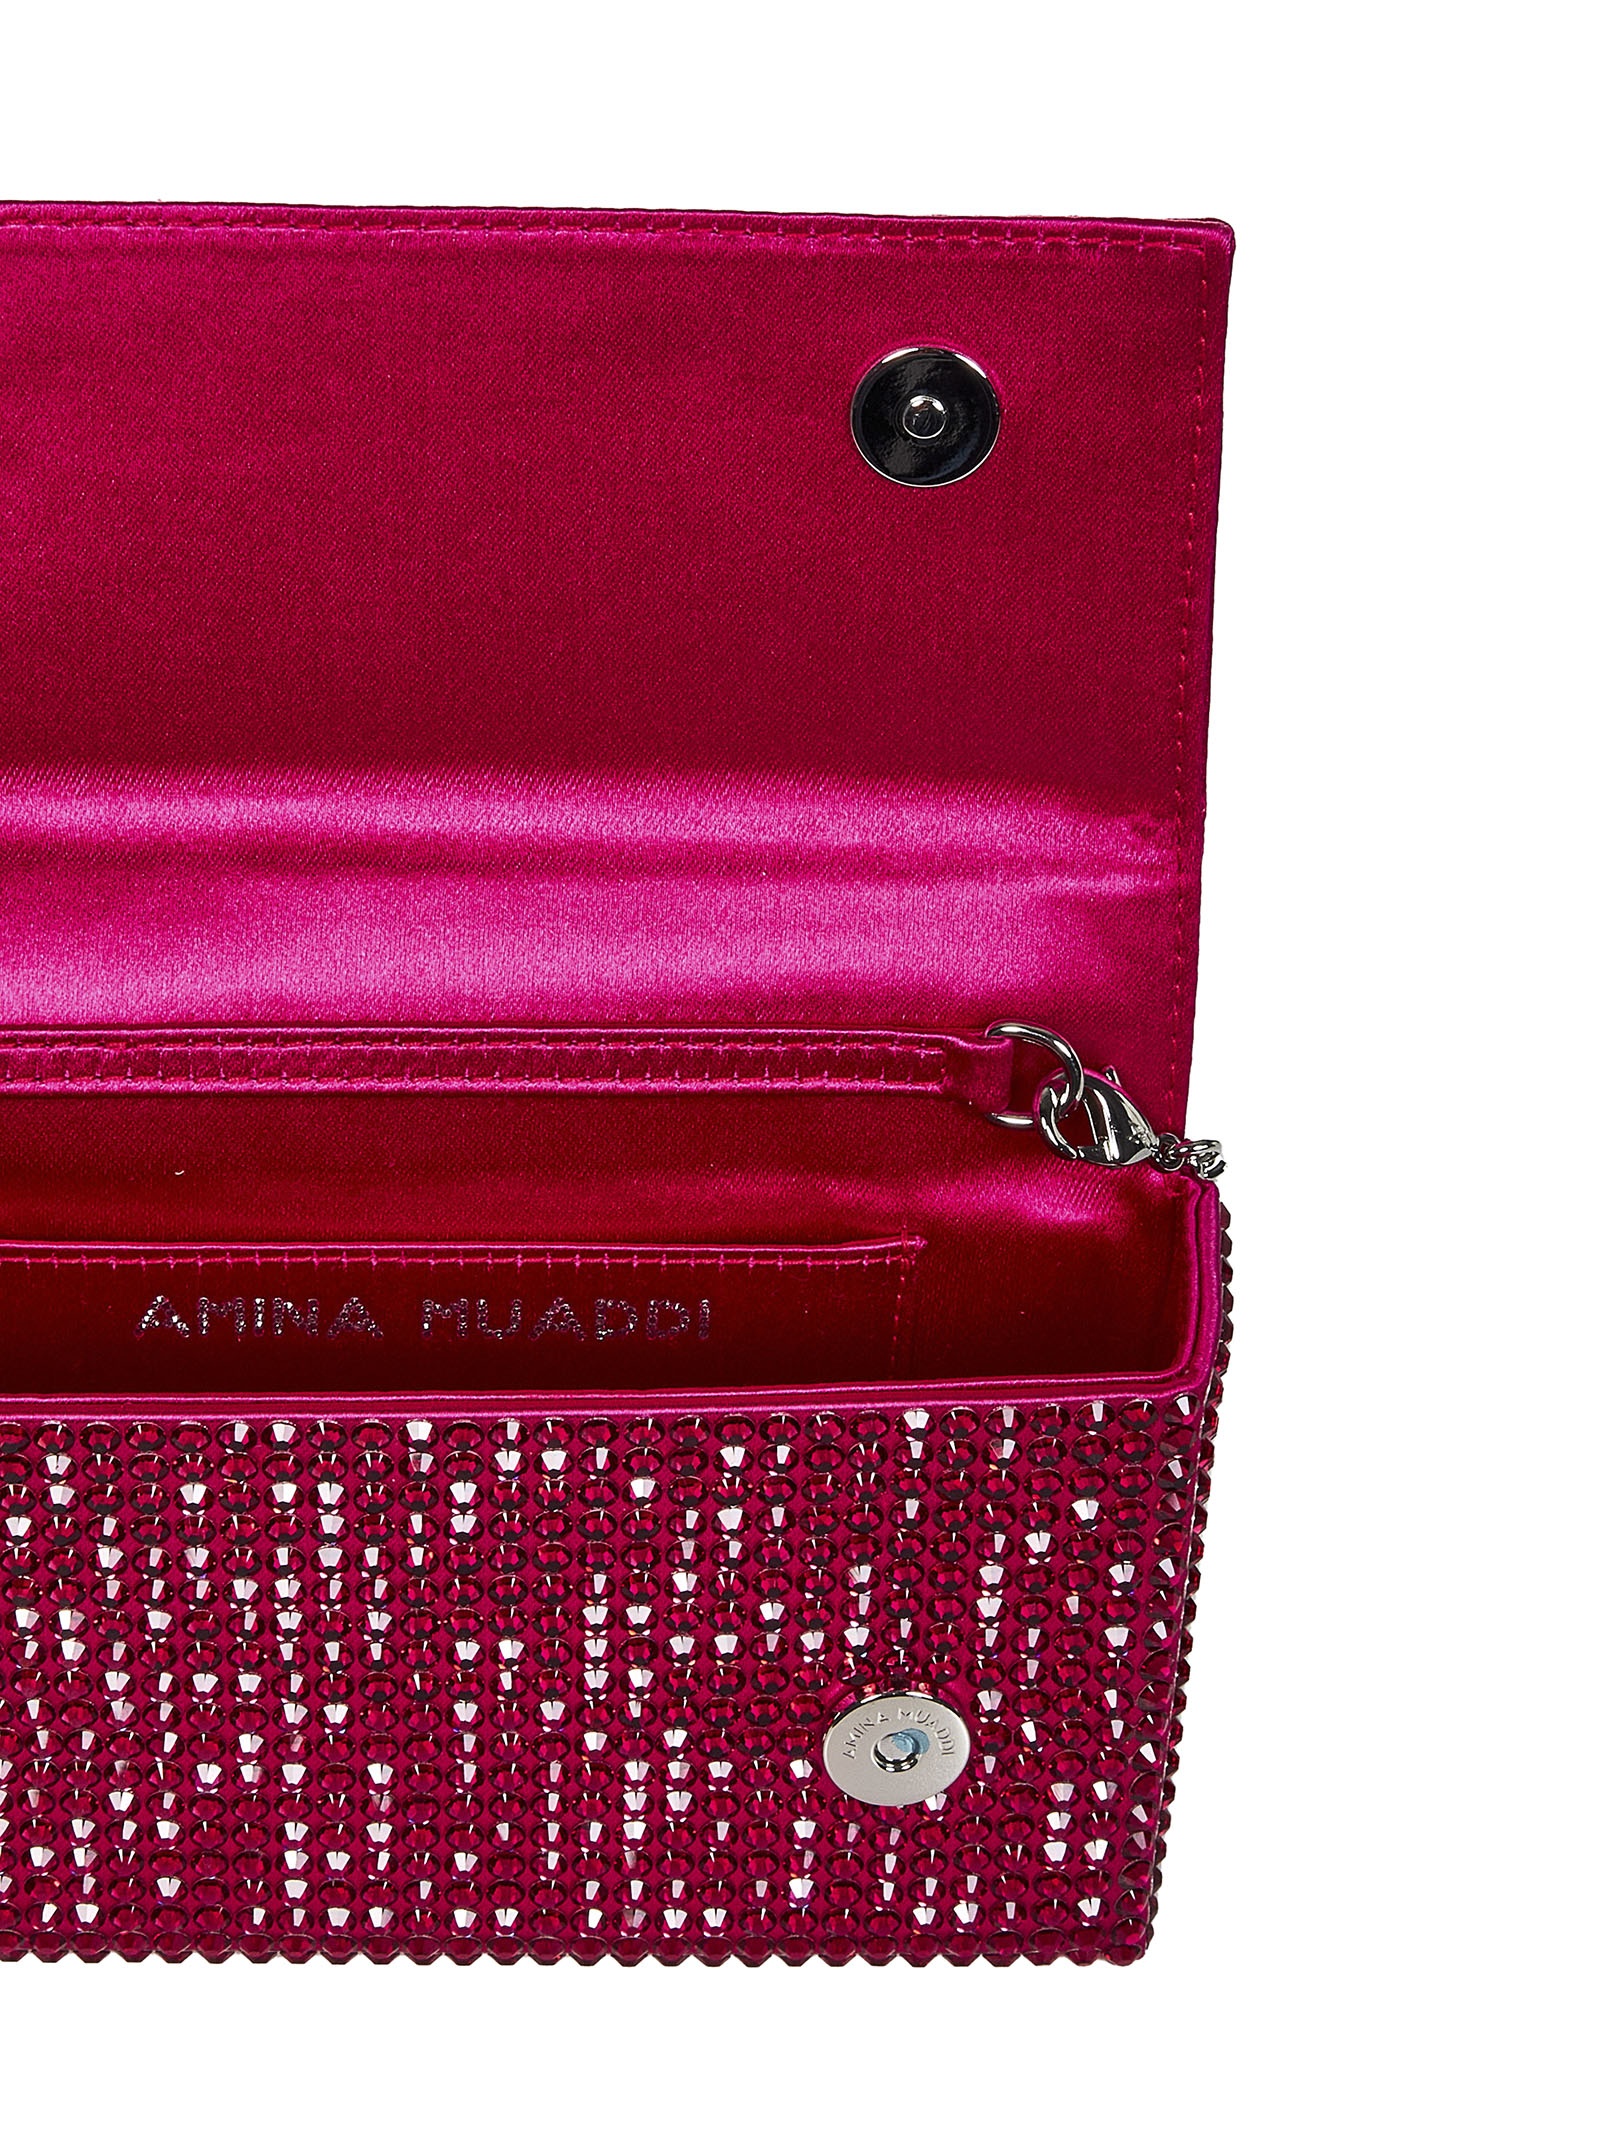 SUPER AMINI PALOMA ruby clutch in satin and crystals with chain shoulder strap. - 4